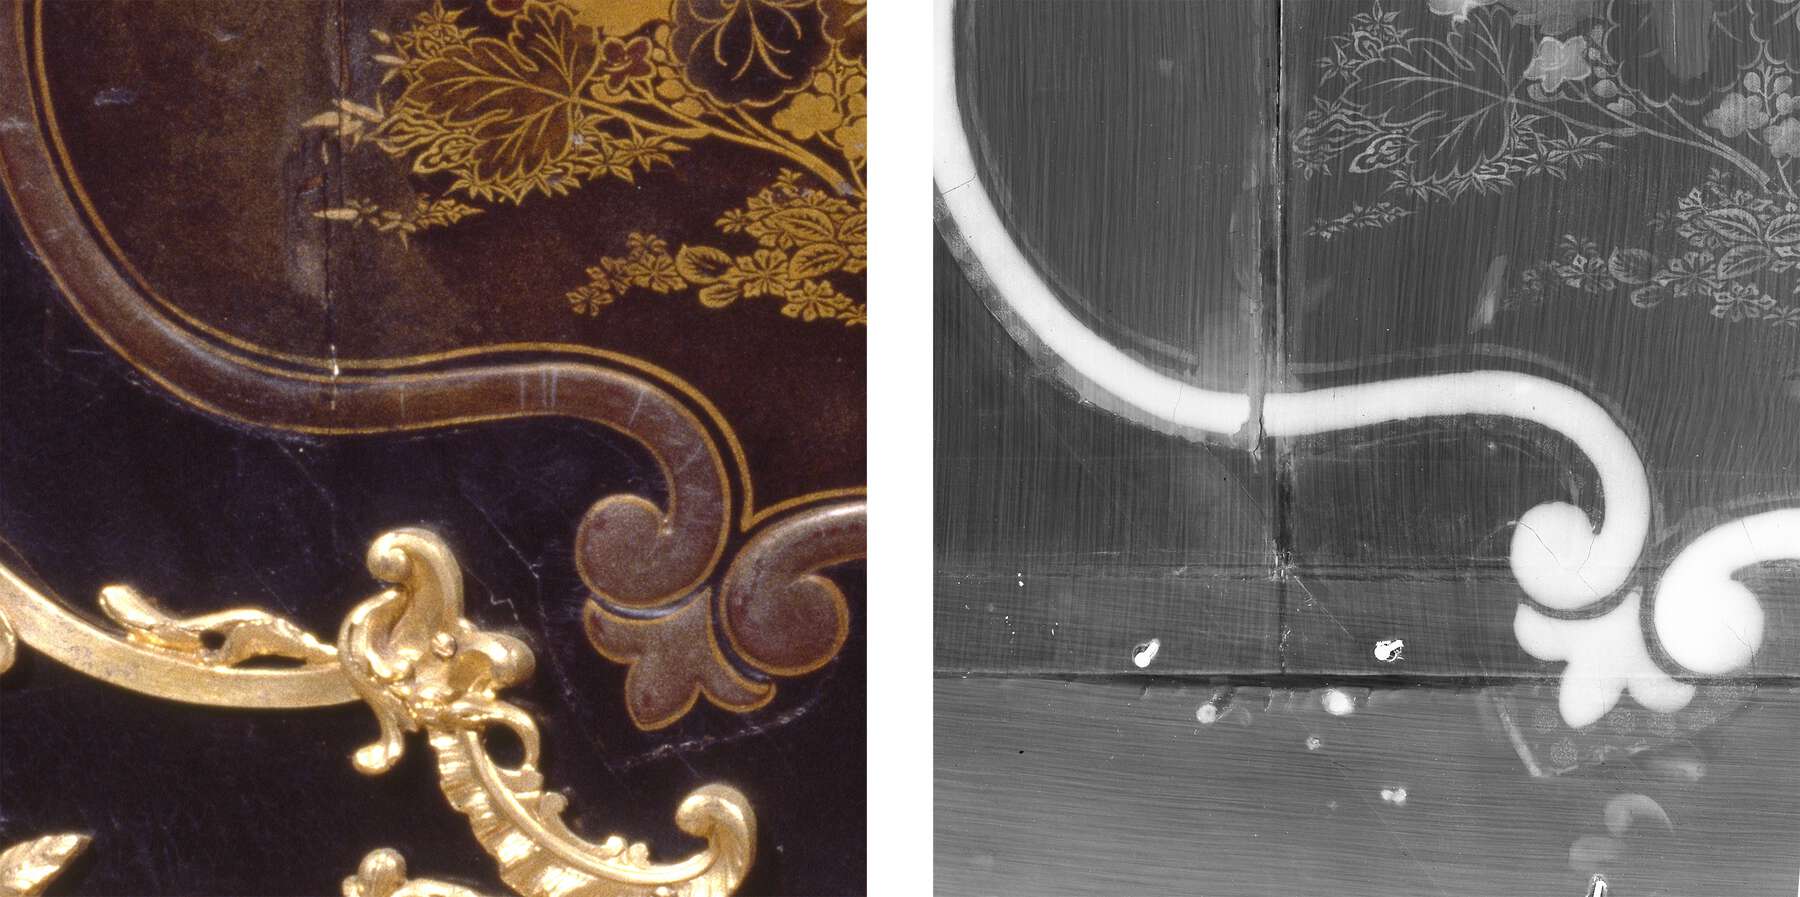 detail of the raised cartouche and part of the lacquer design on the front of the cabinet, coupled with a black and white x-ray of the same section that shows the original flat decoration in white